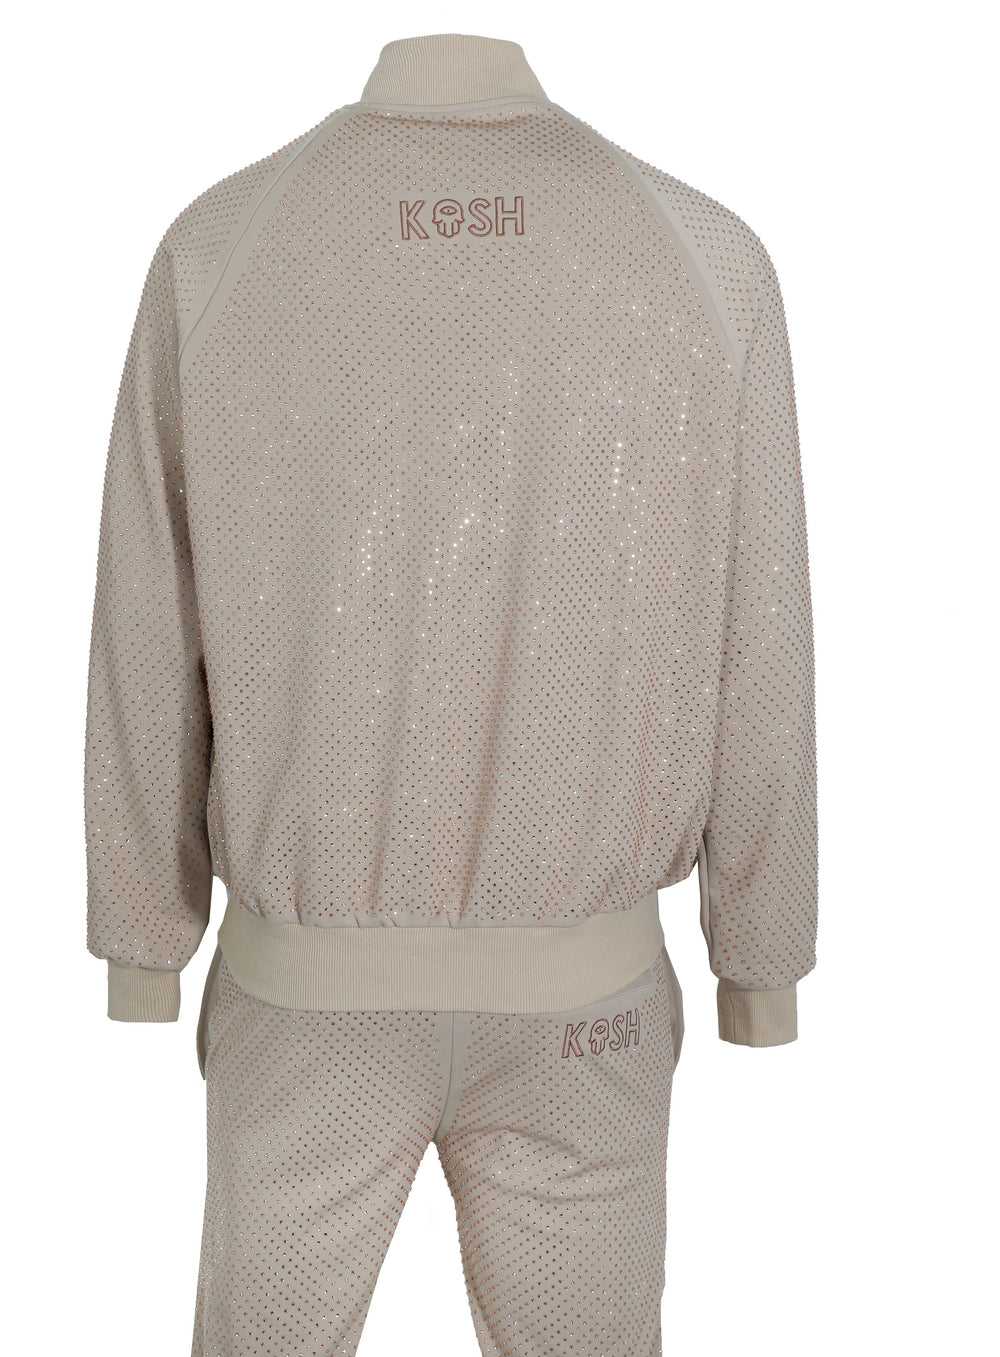 Kash All Over Diamond Track Jacket Elastic Waistband Drawstring closure Color: Beige 100% Polyester Wrinkle Free Material Fits true to size